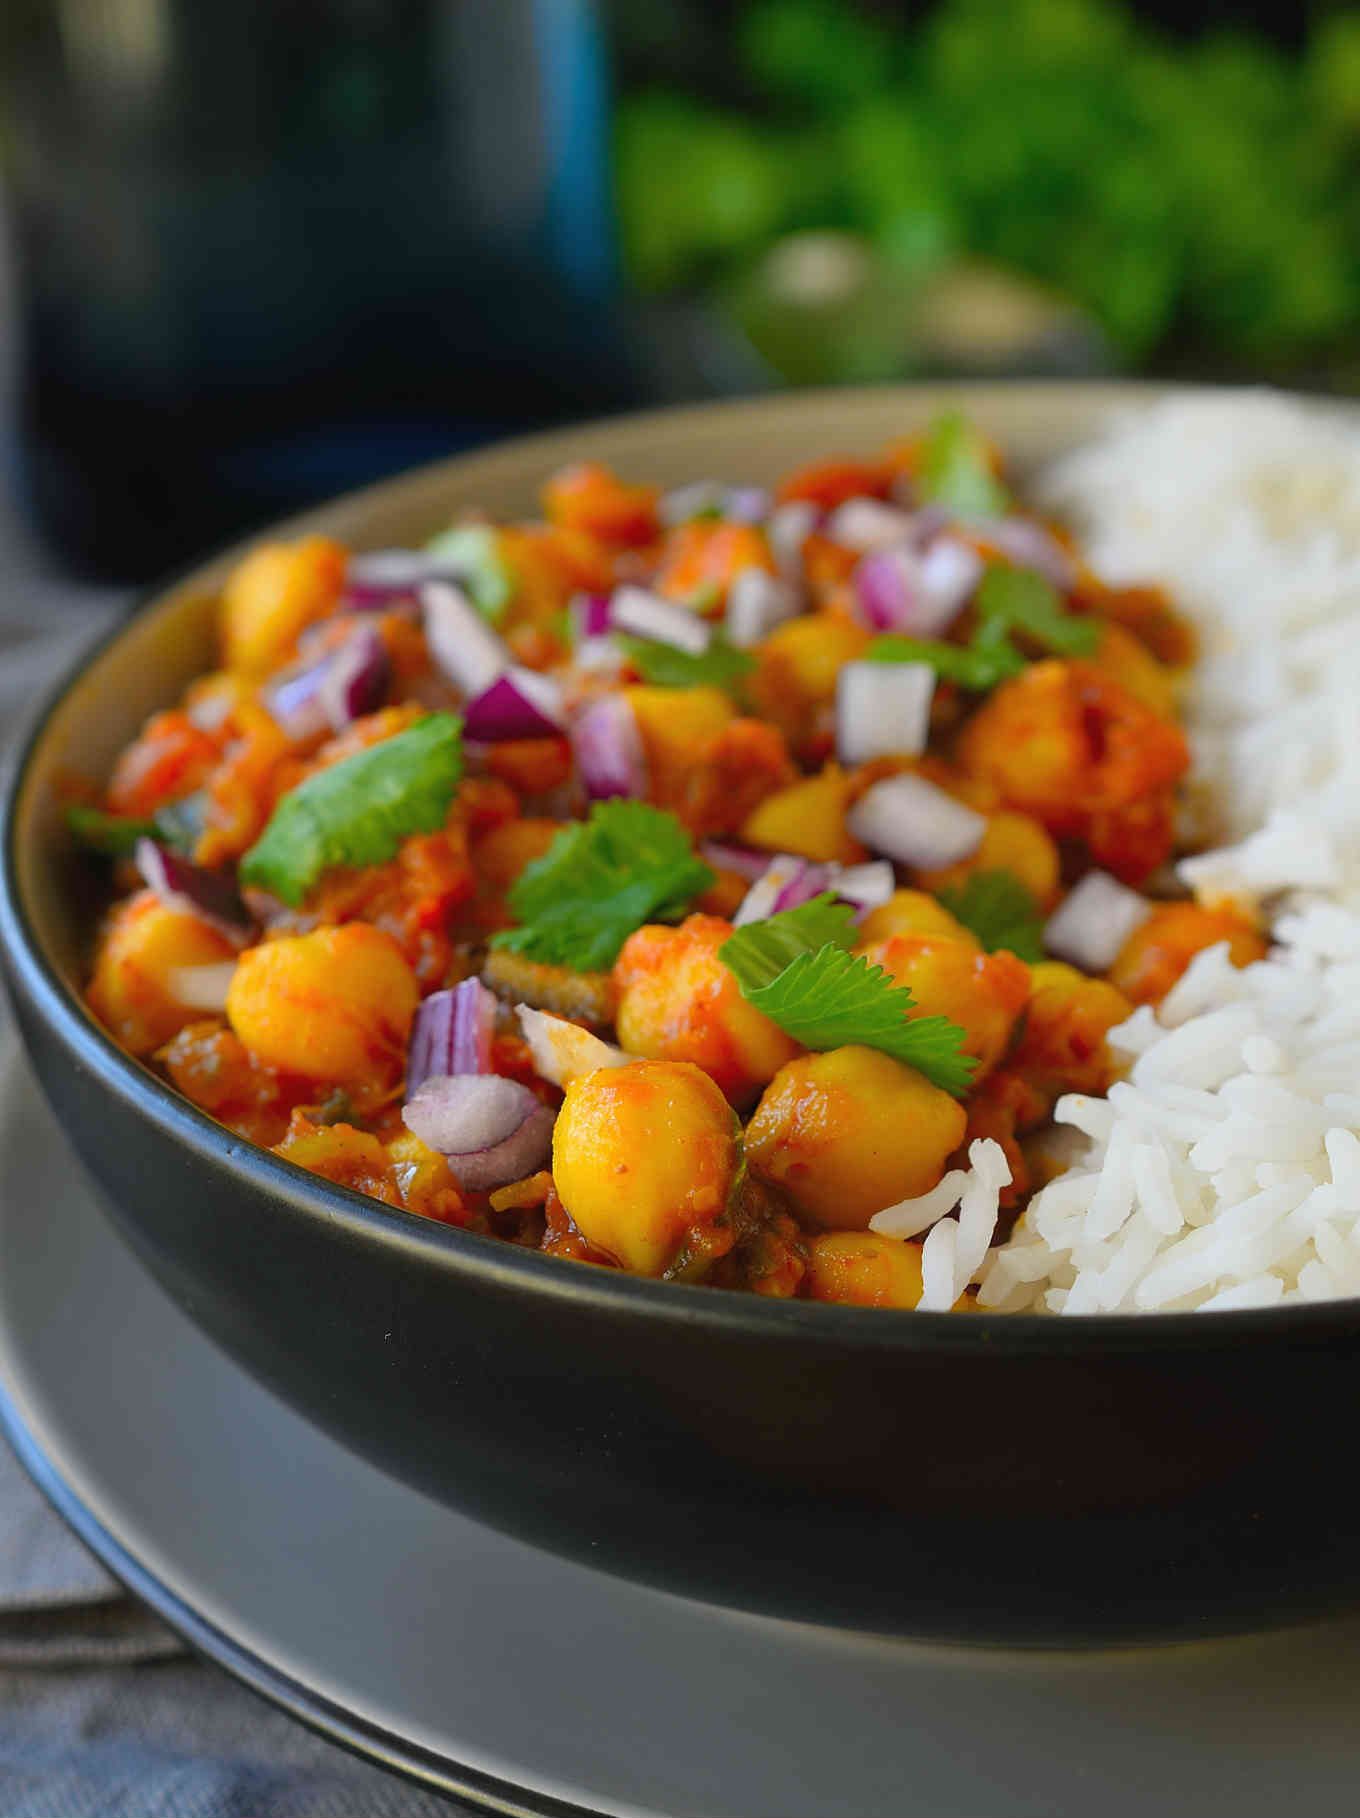 Vegan chickpea curry is an easy and flavourful tomato-based curry great for a weeknight dinner. Adjust the spice level to your preference with this recipe and feel free to add in other greens and veggies like kale, spinach or broccoli for a healthy and satisfying meal! 